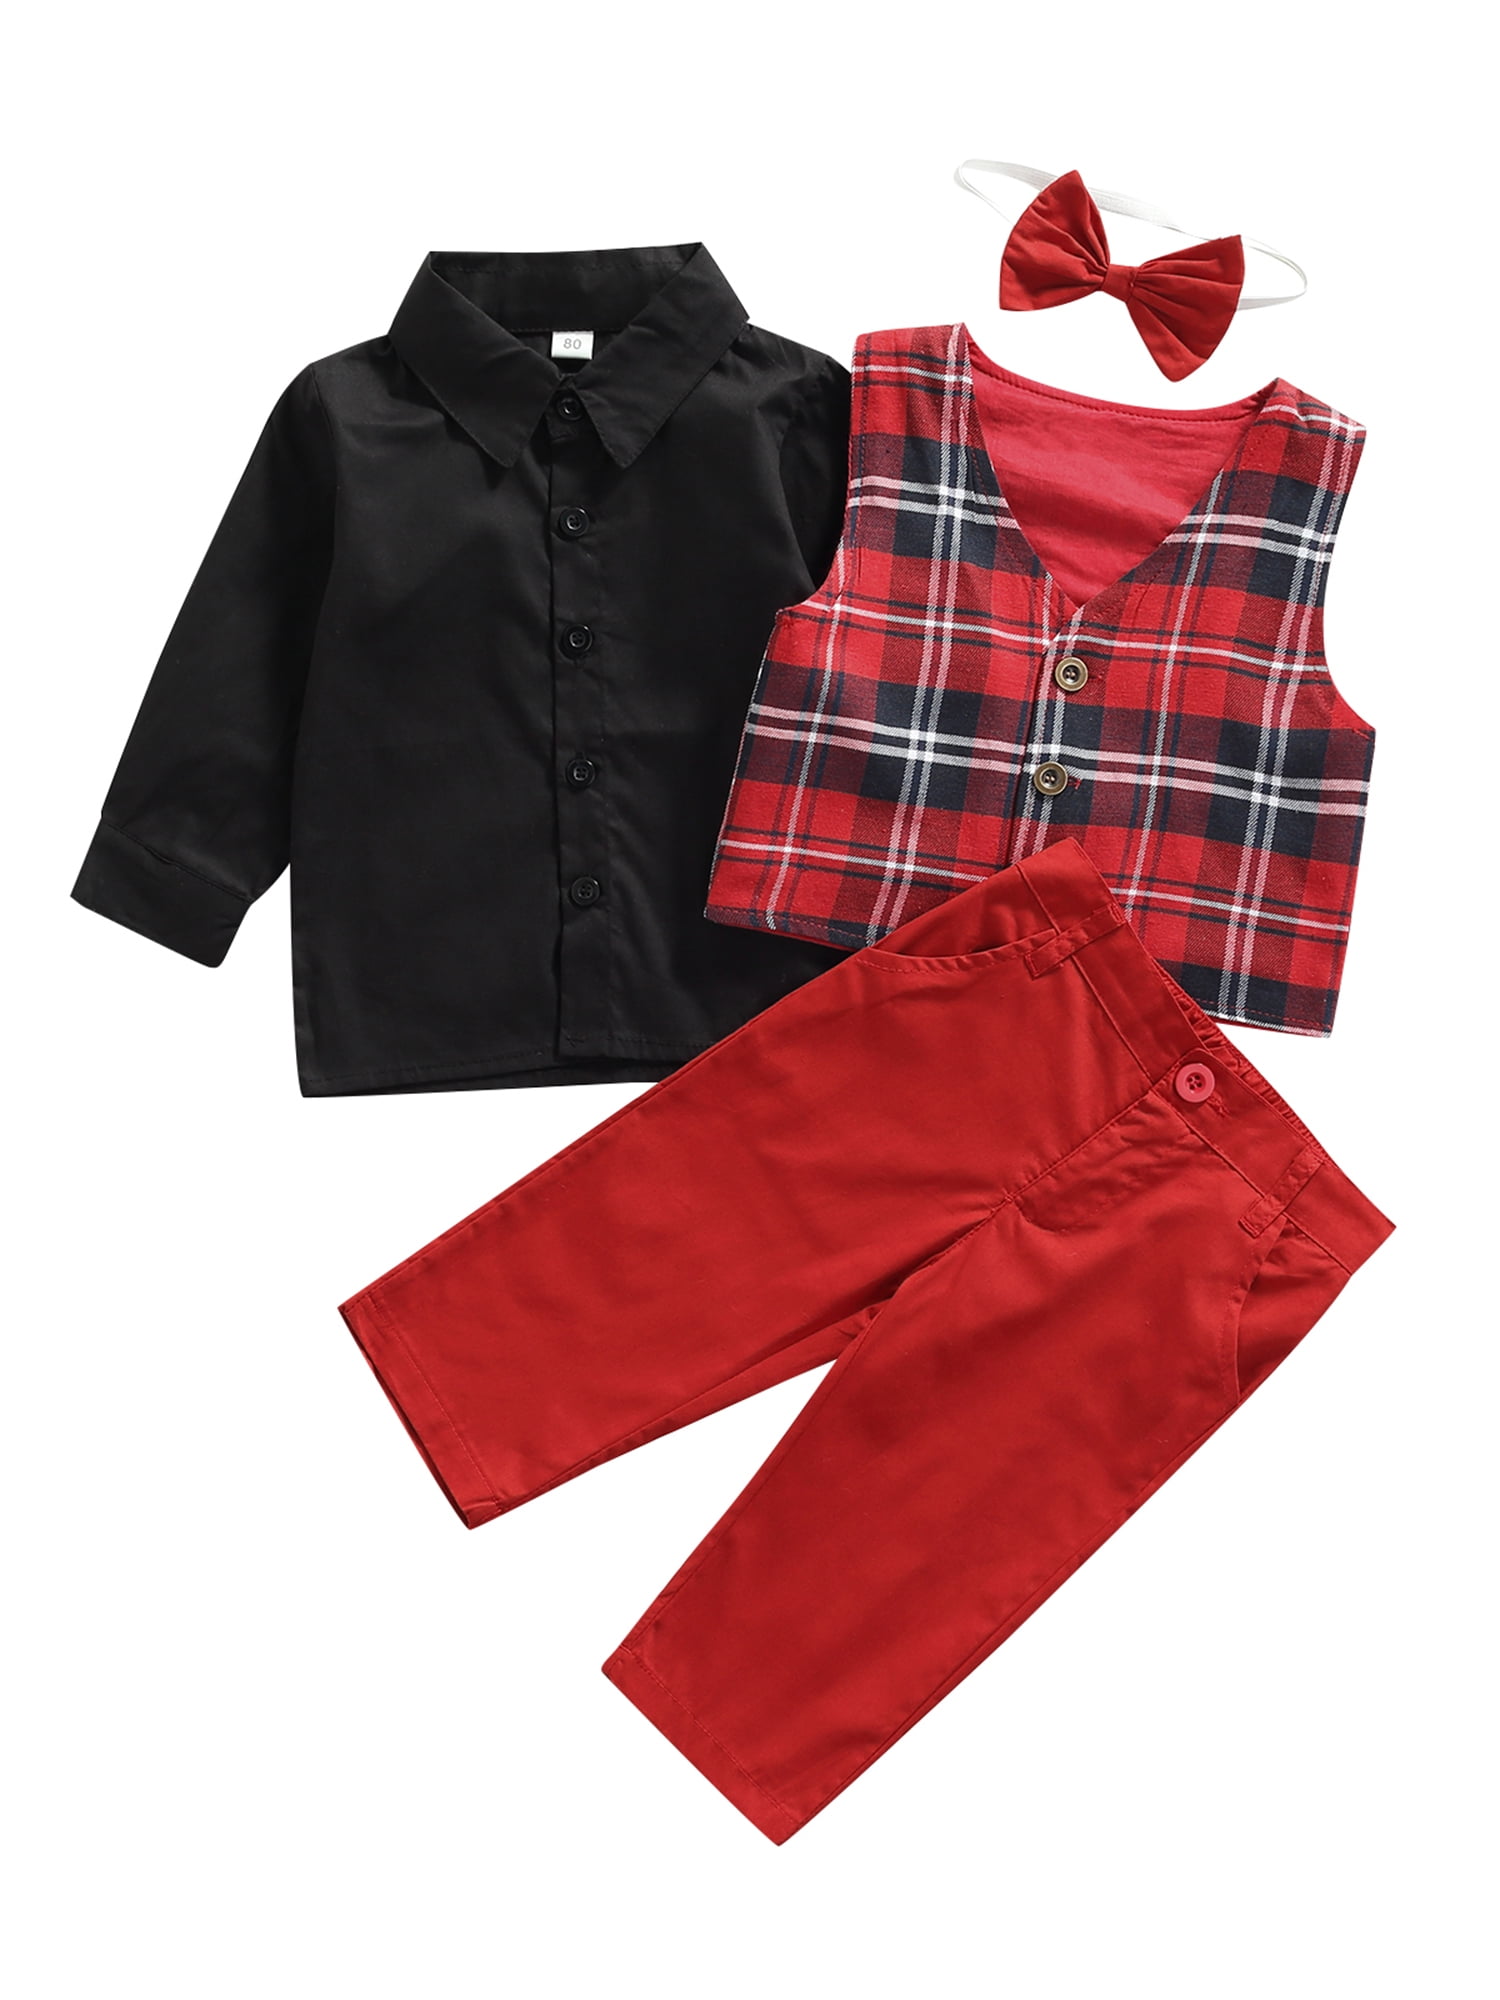 2 PC Handsome Outfits Suit Set Toddler Boys Lapel Plaid Tops Shirt Demin Pants Overall with Bowtie Gentleman Clothes 